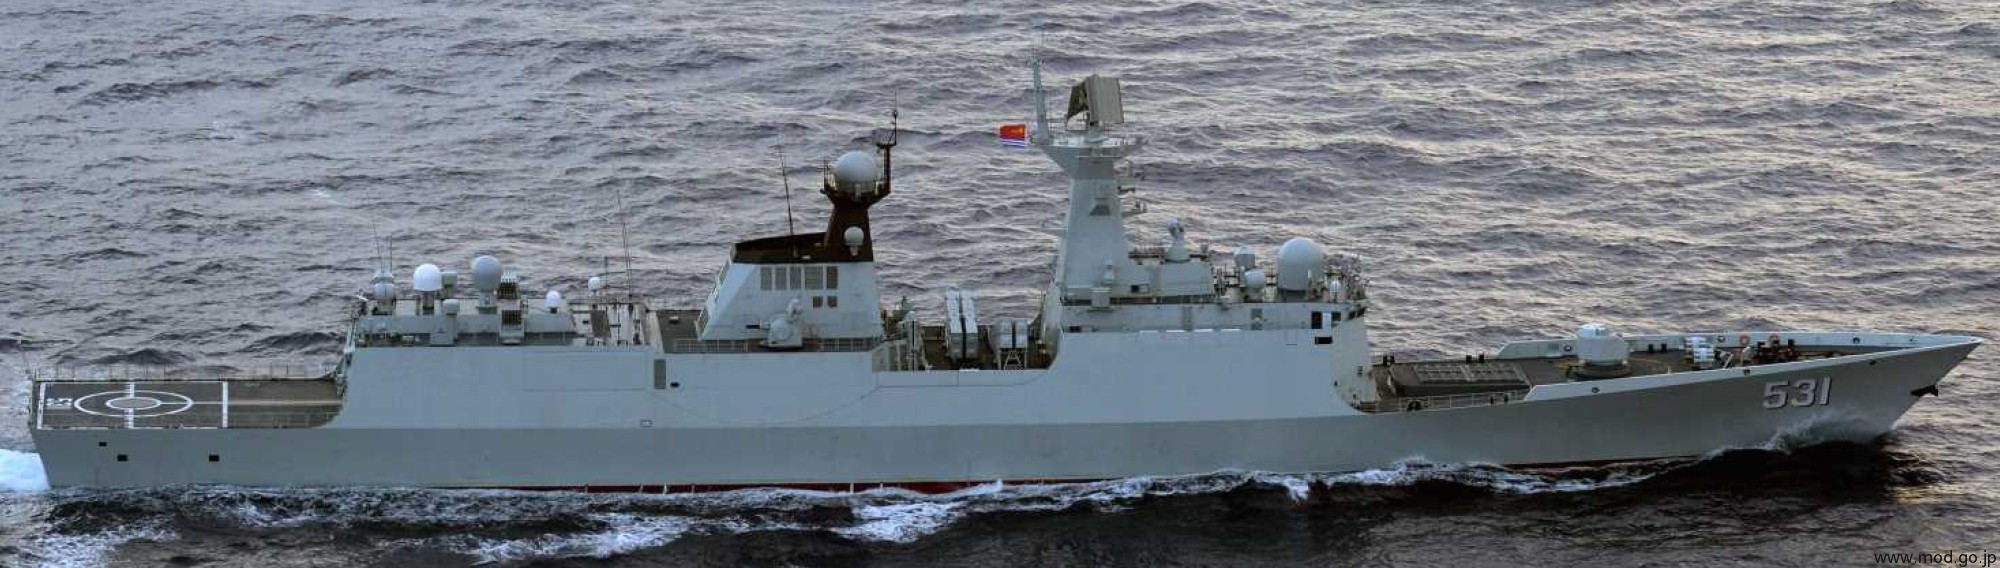 ffg-531 plans xiangtan type 054a jiangkai ii class guided missile frigate china people's liberation army navy 03